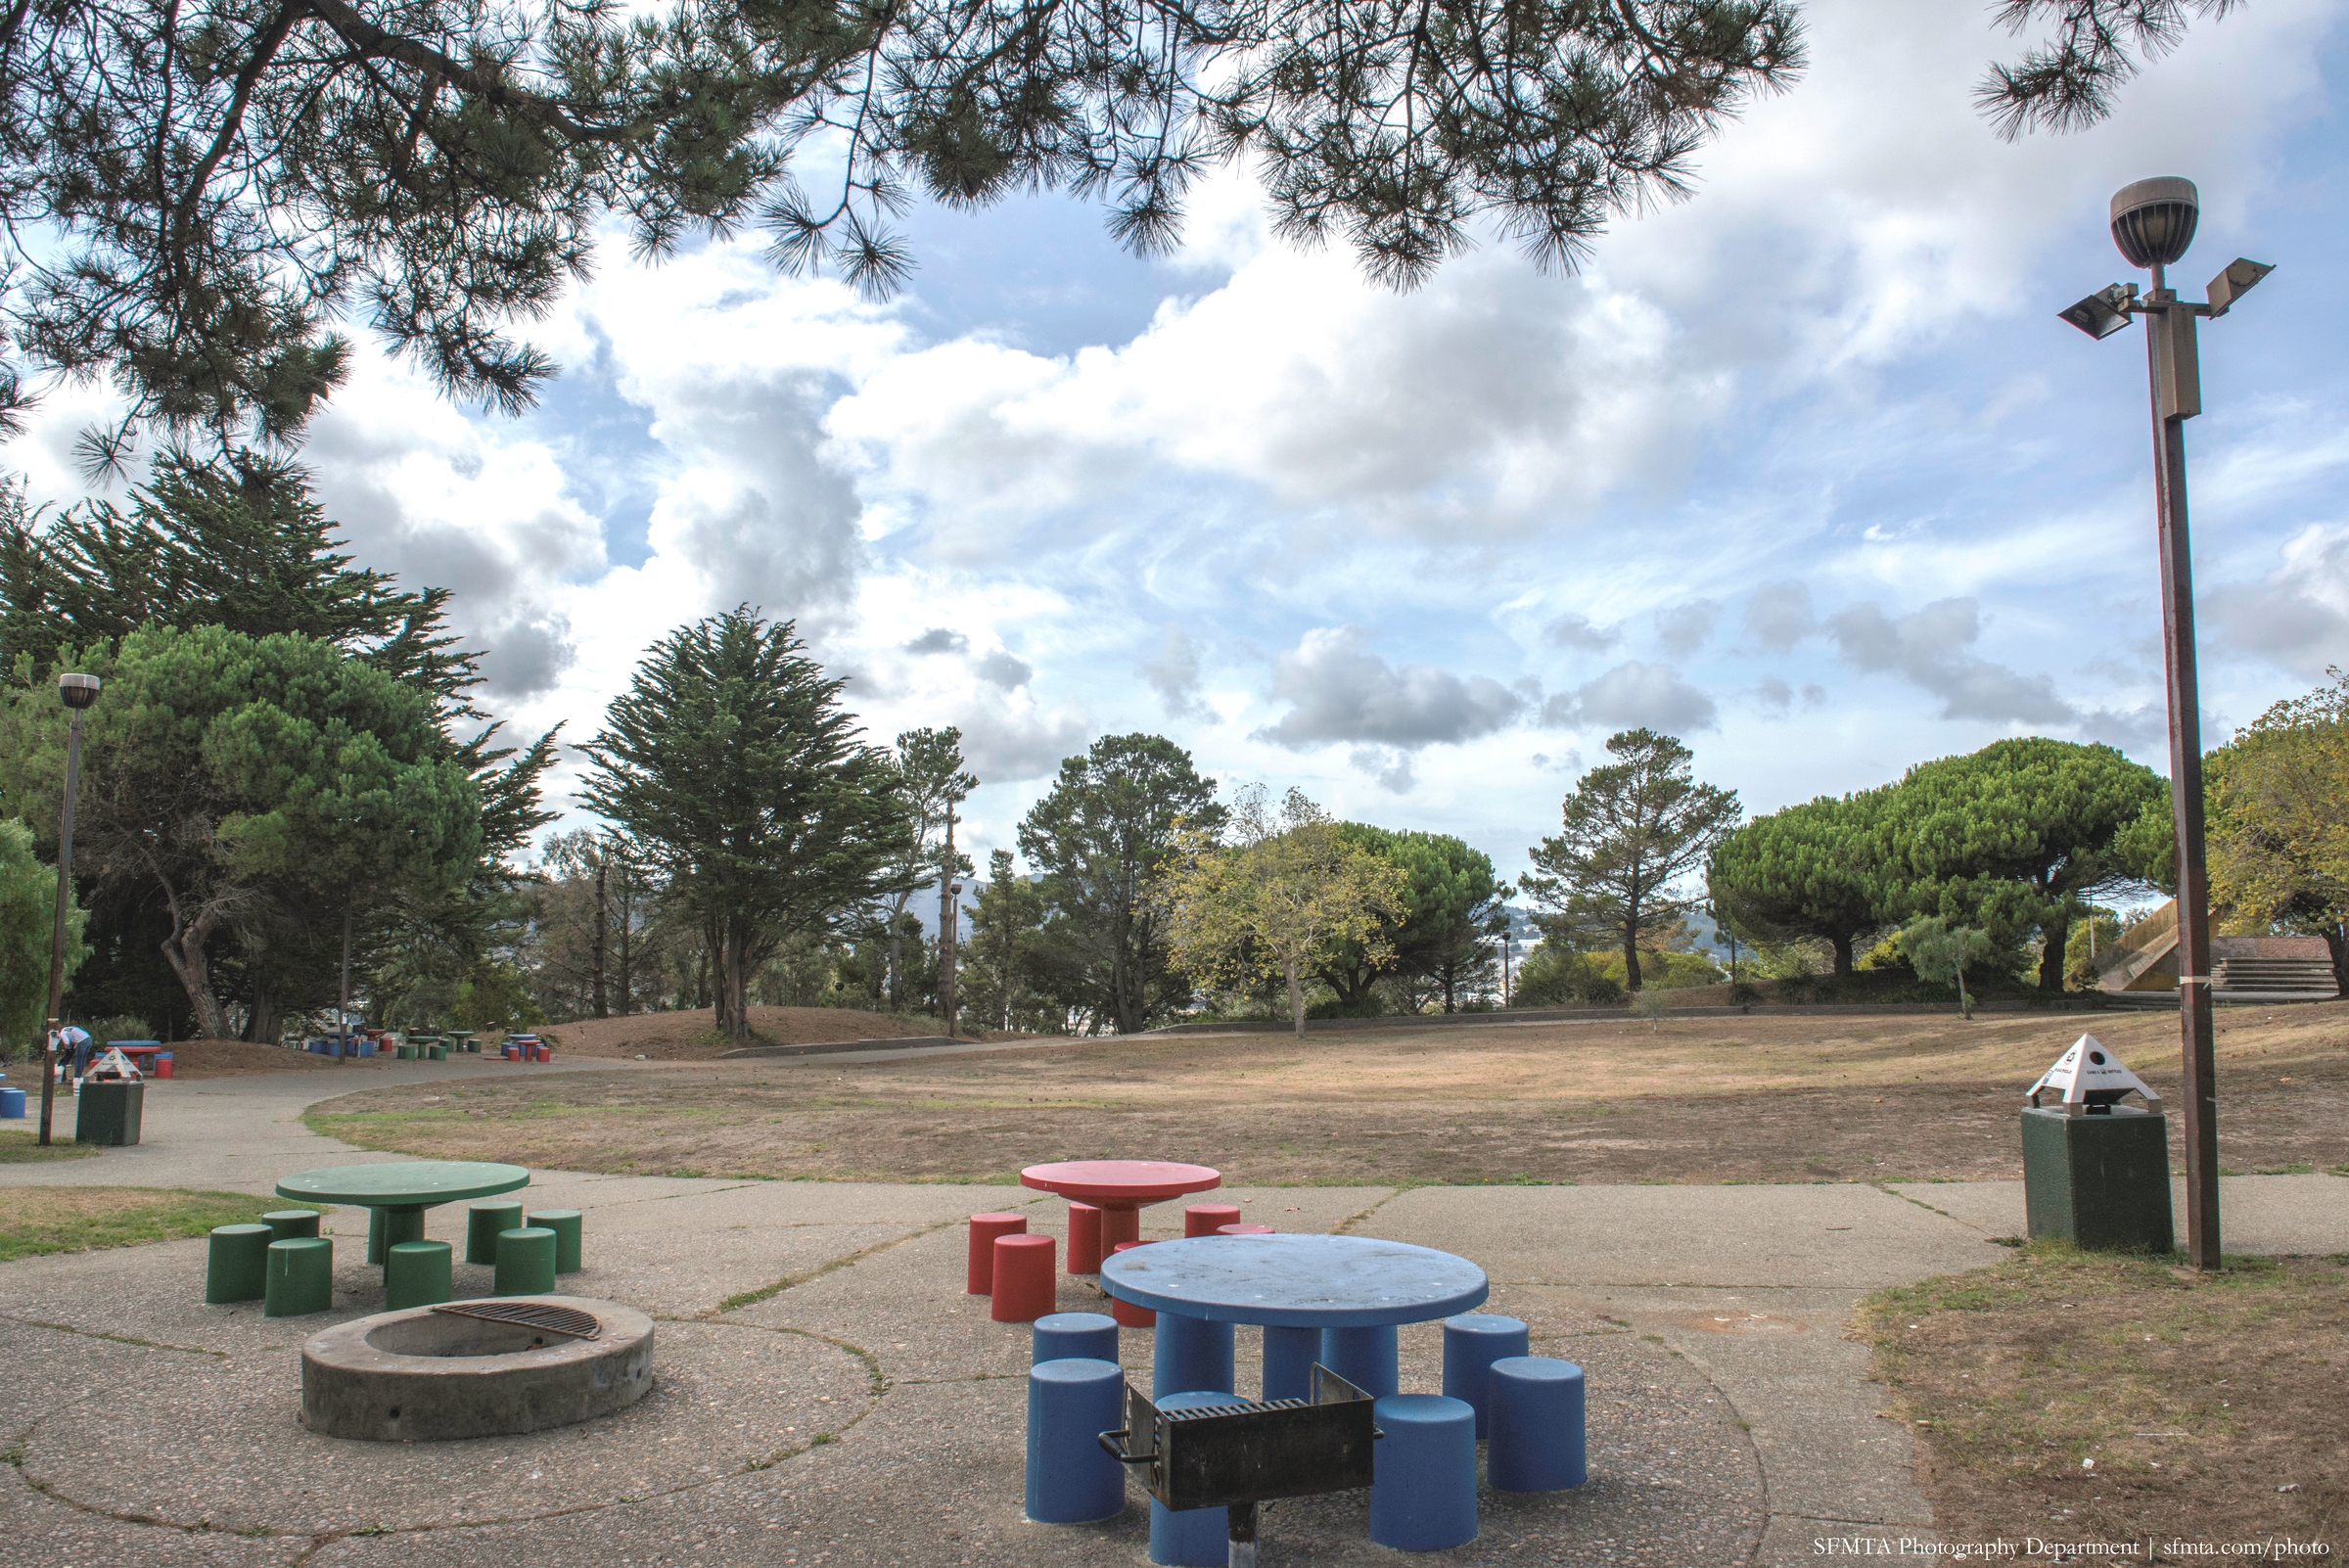 The picnic area at Hilltop Park